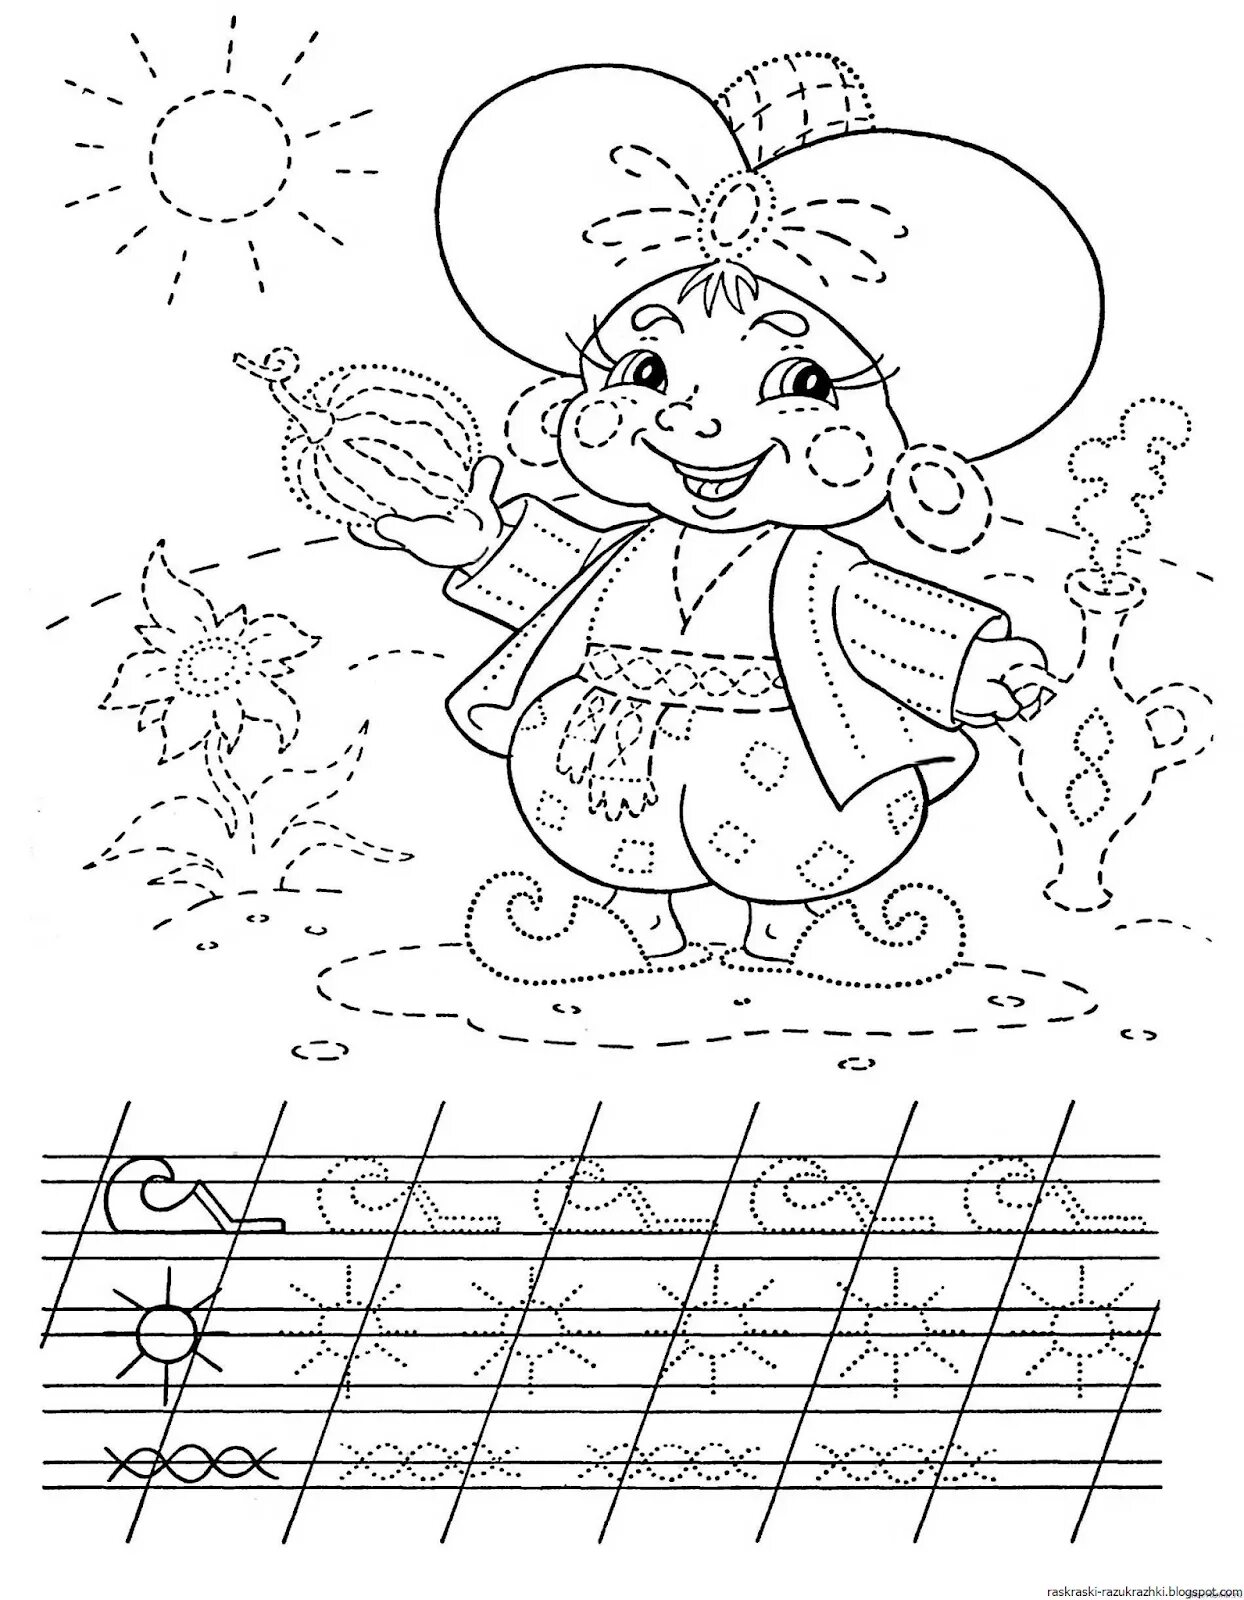 Adorable recipe coloring page for 4-5 year olds